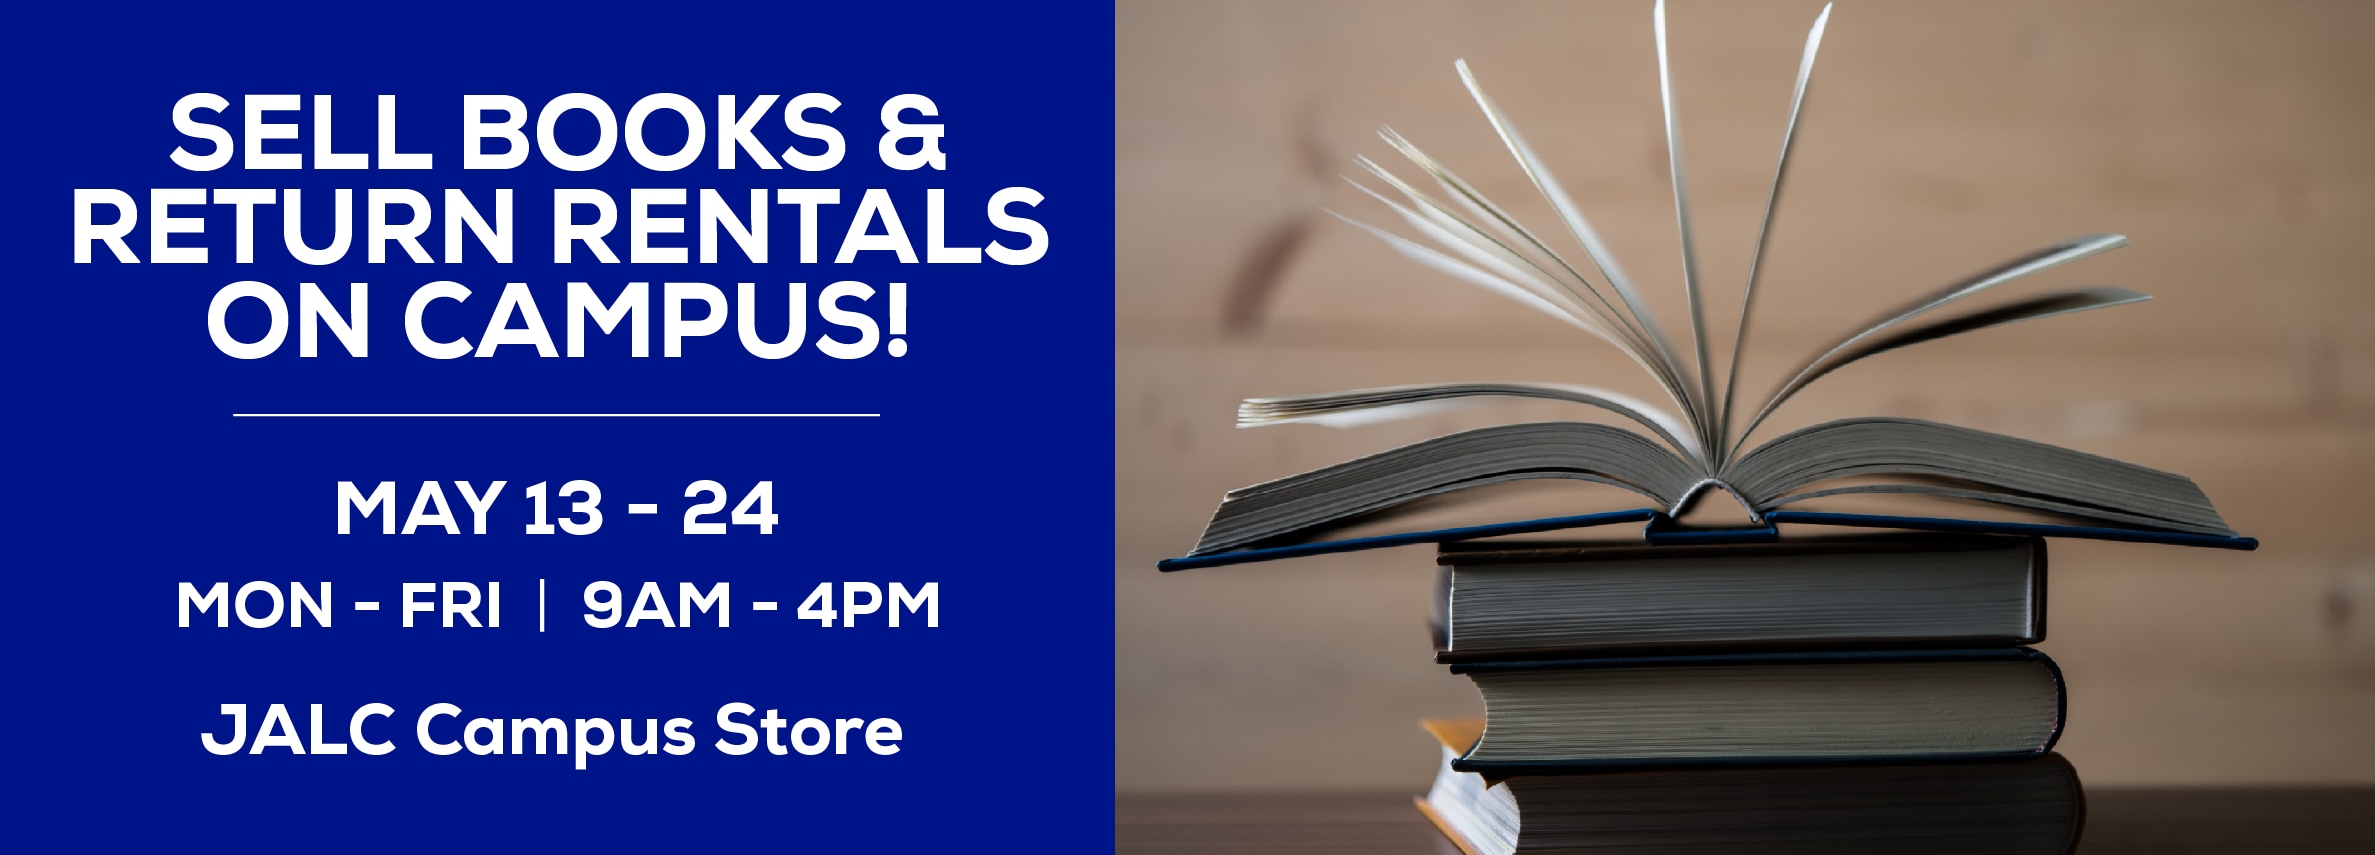 Sell Books & Return Rentals On Campus! May 13 - 24, Mon-Fri 9AM - 4PM at the JALC Campus Store